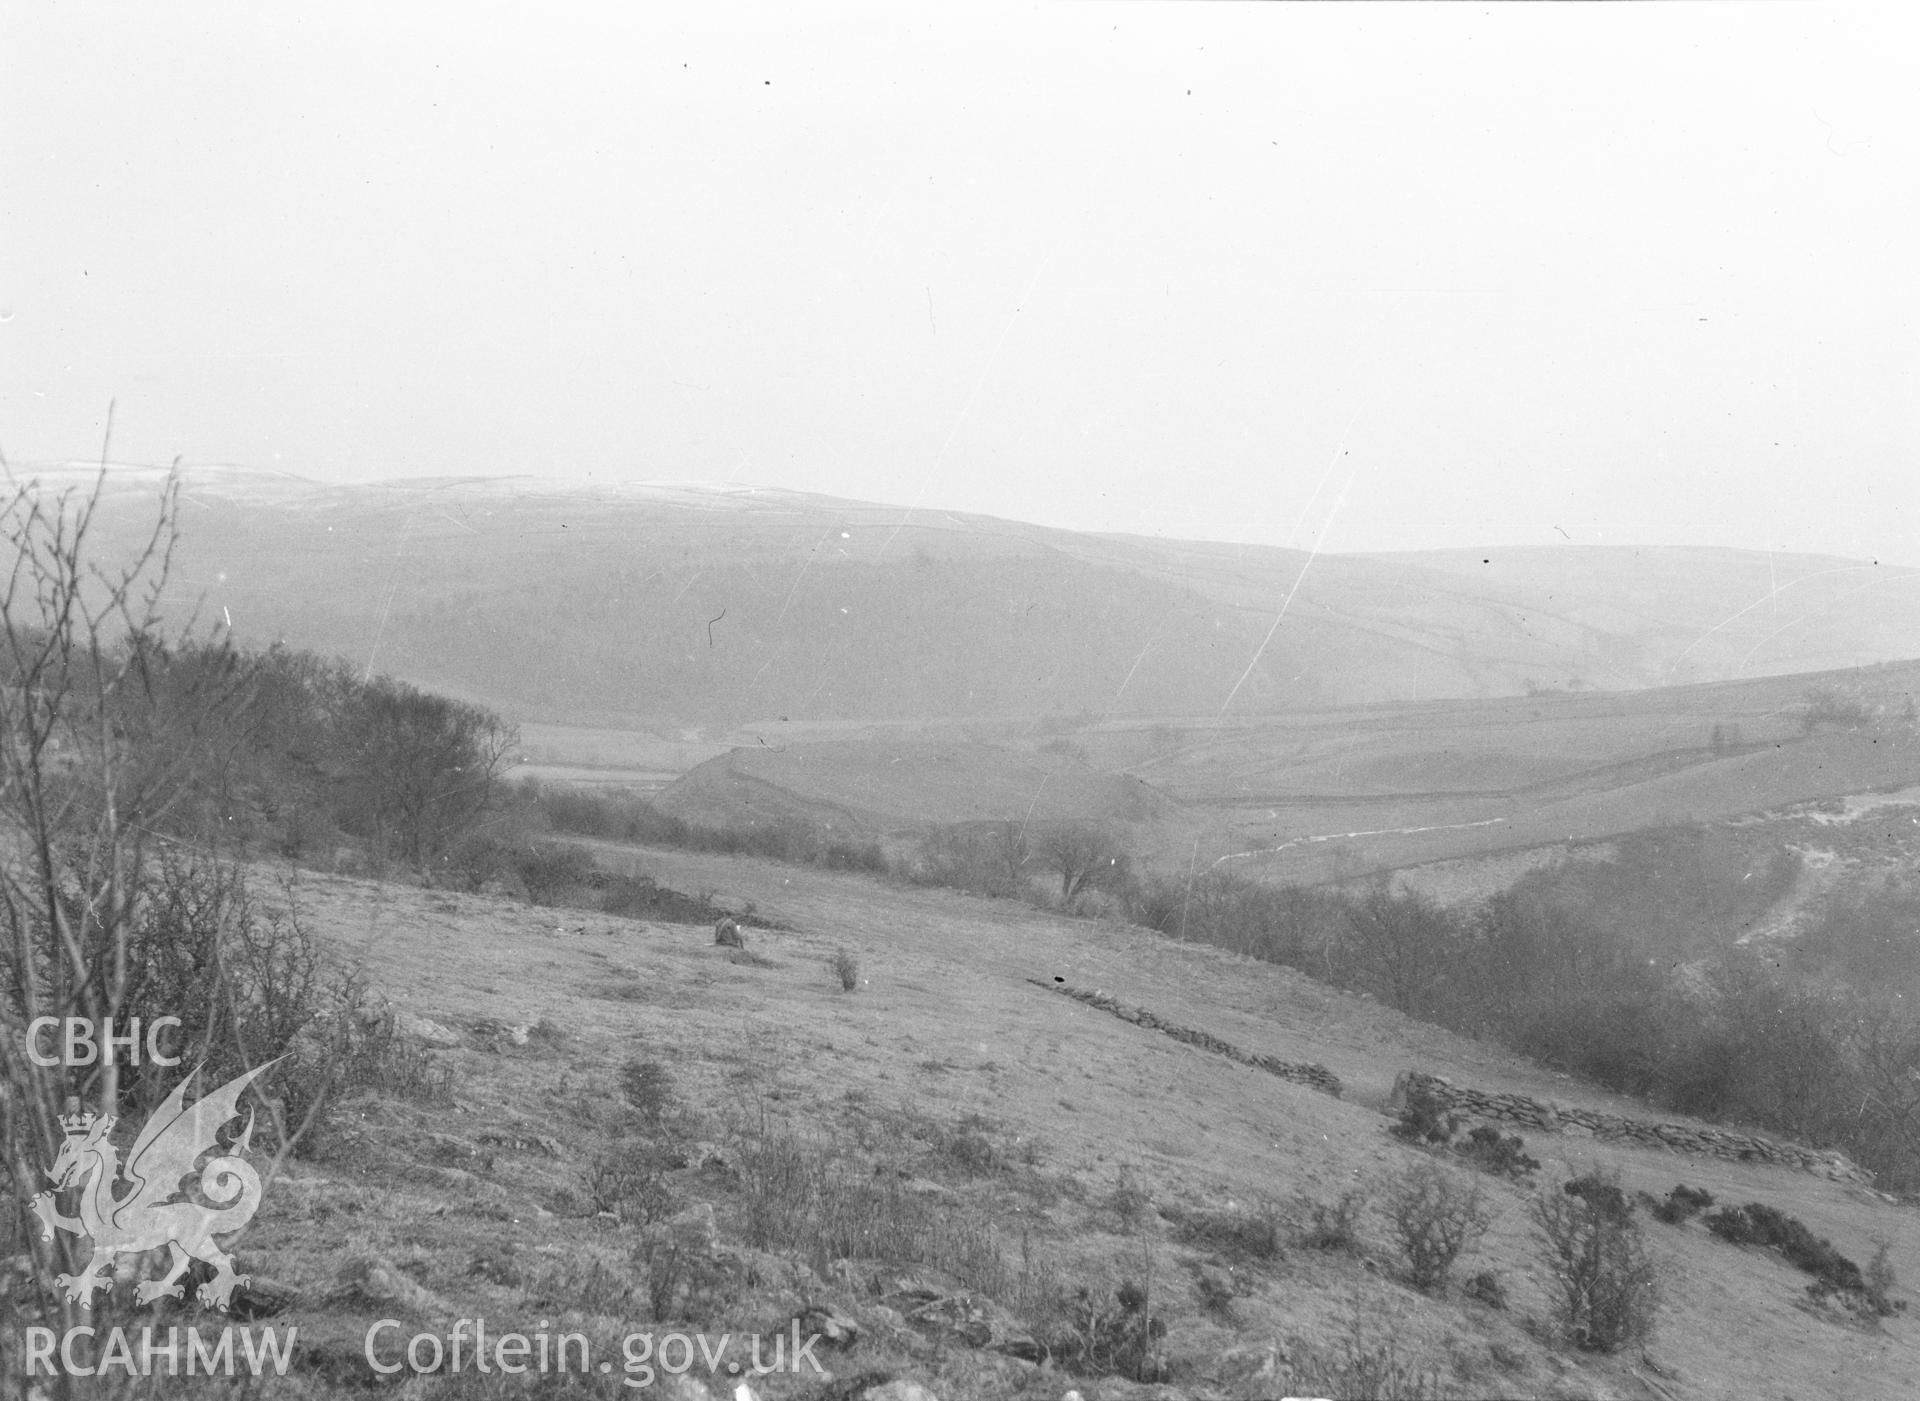 Digital copy of black and white negative relating to Caer Ddunod Camp. From the Cadw Monuments in Care Collection.